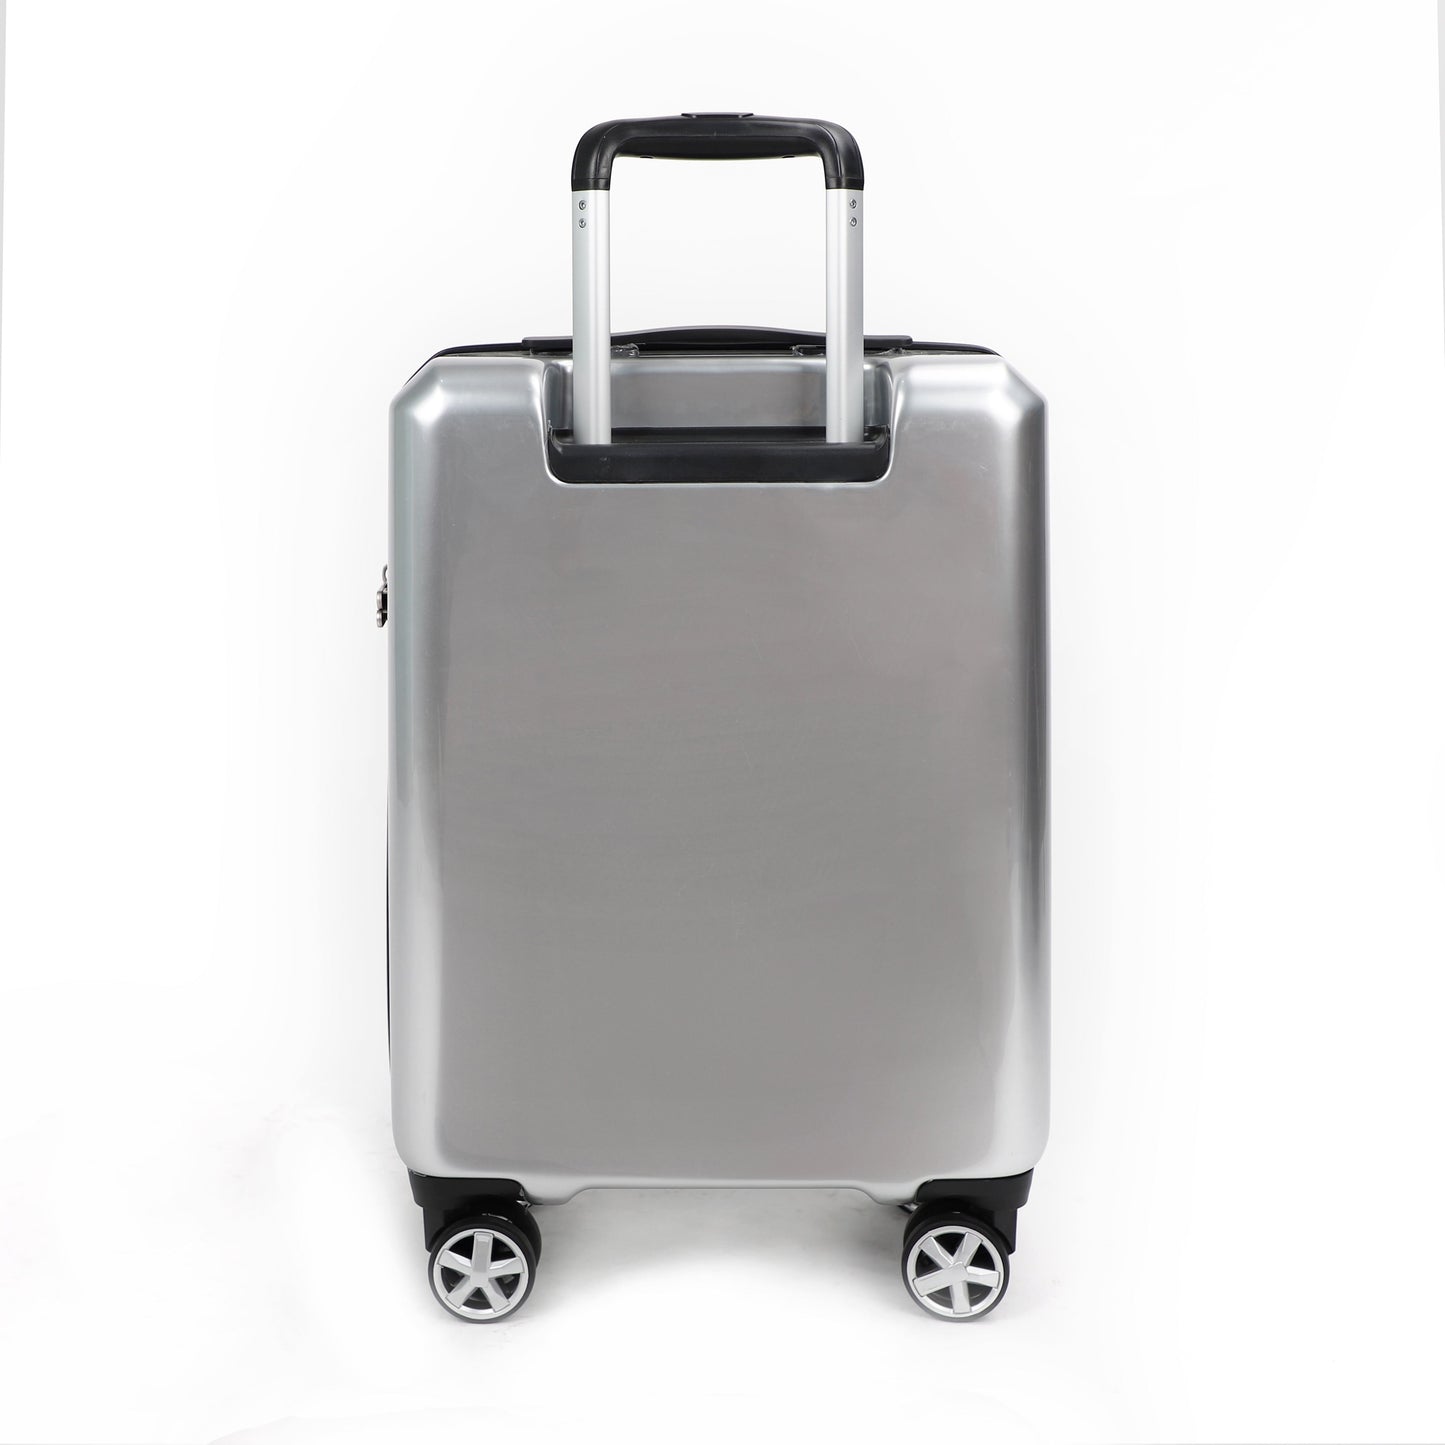 Airline_Carry_On_Luggage_Silver_rear_view_T1978155103